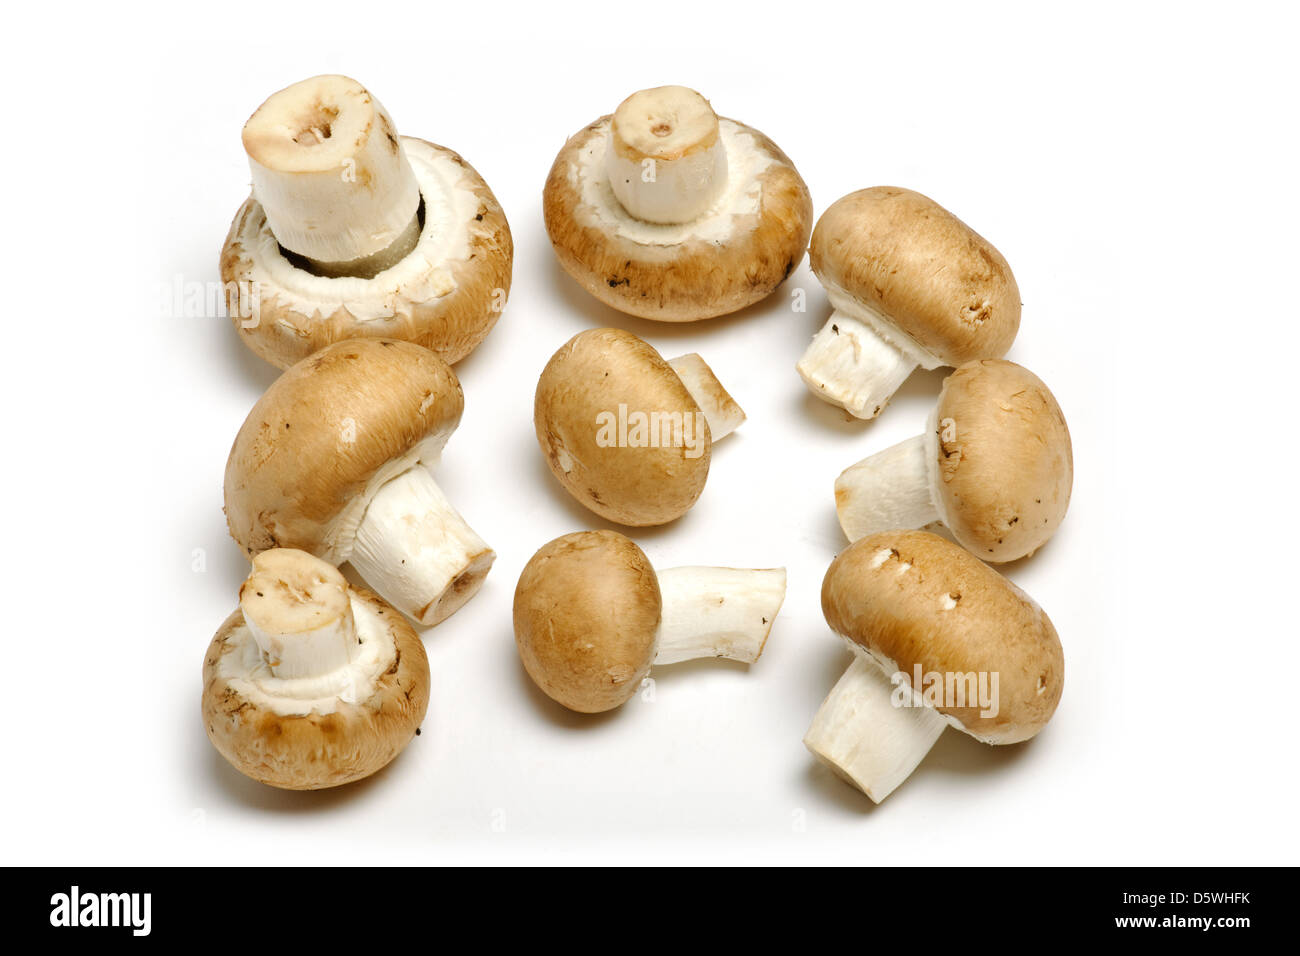 Group of chestnut mushrooms on a white background Stock Photo